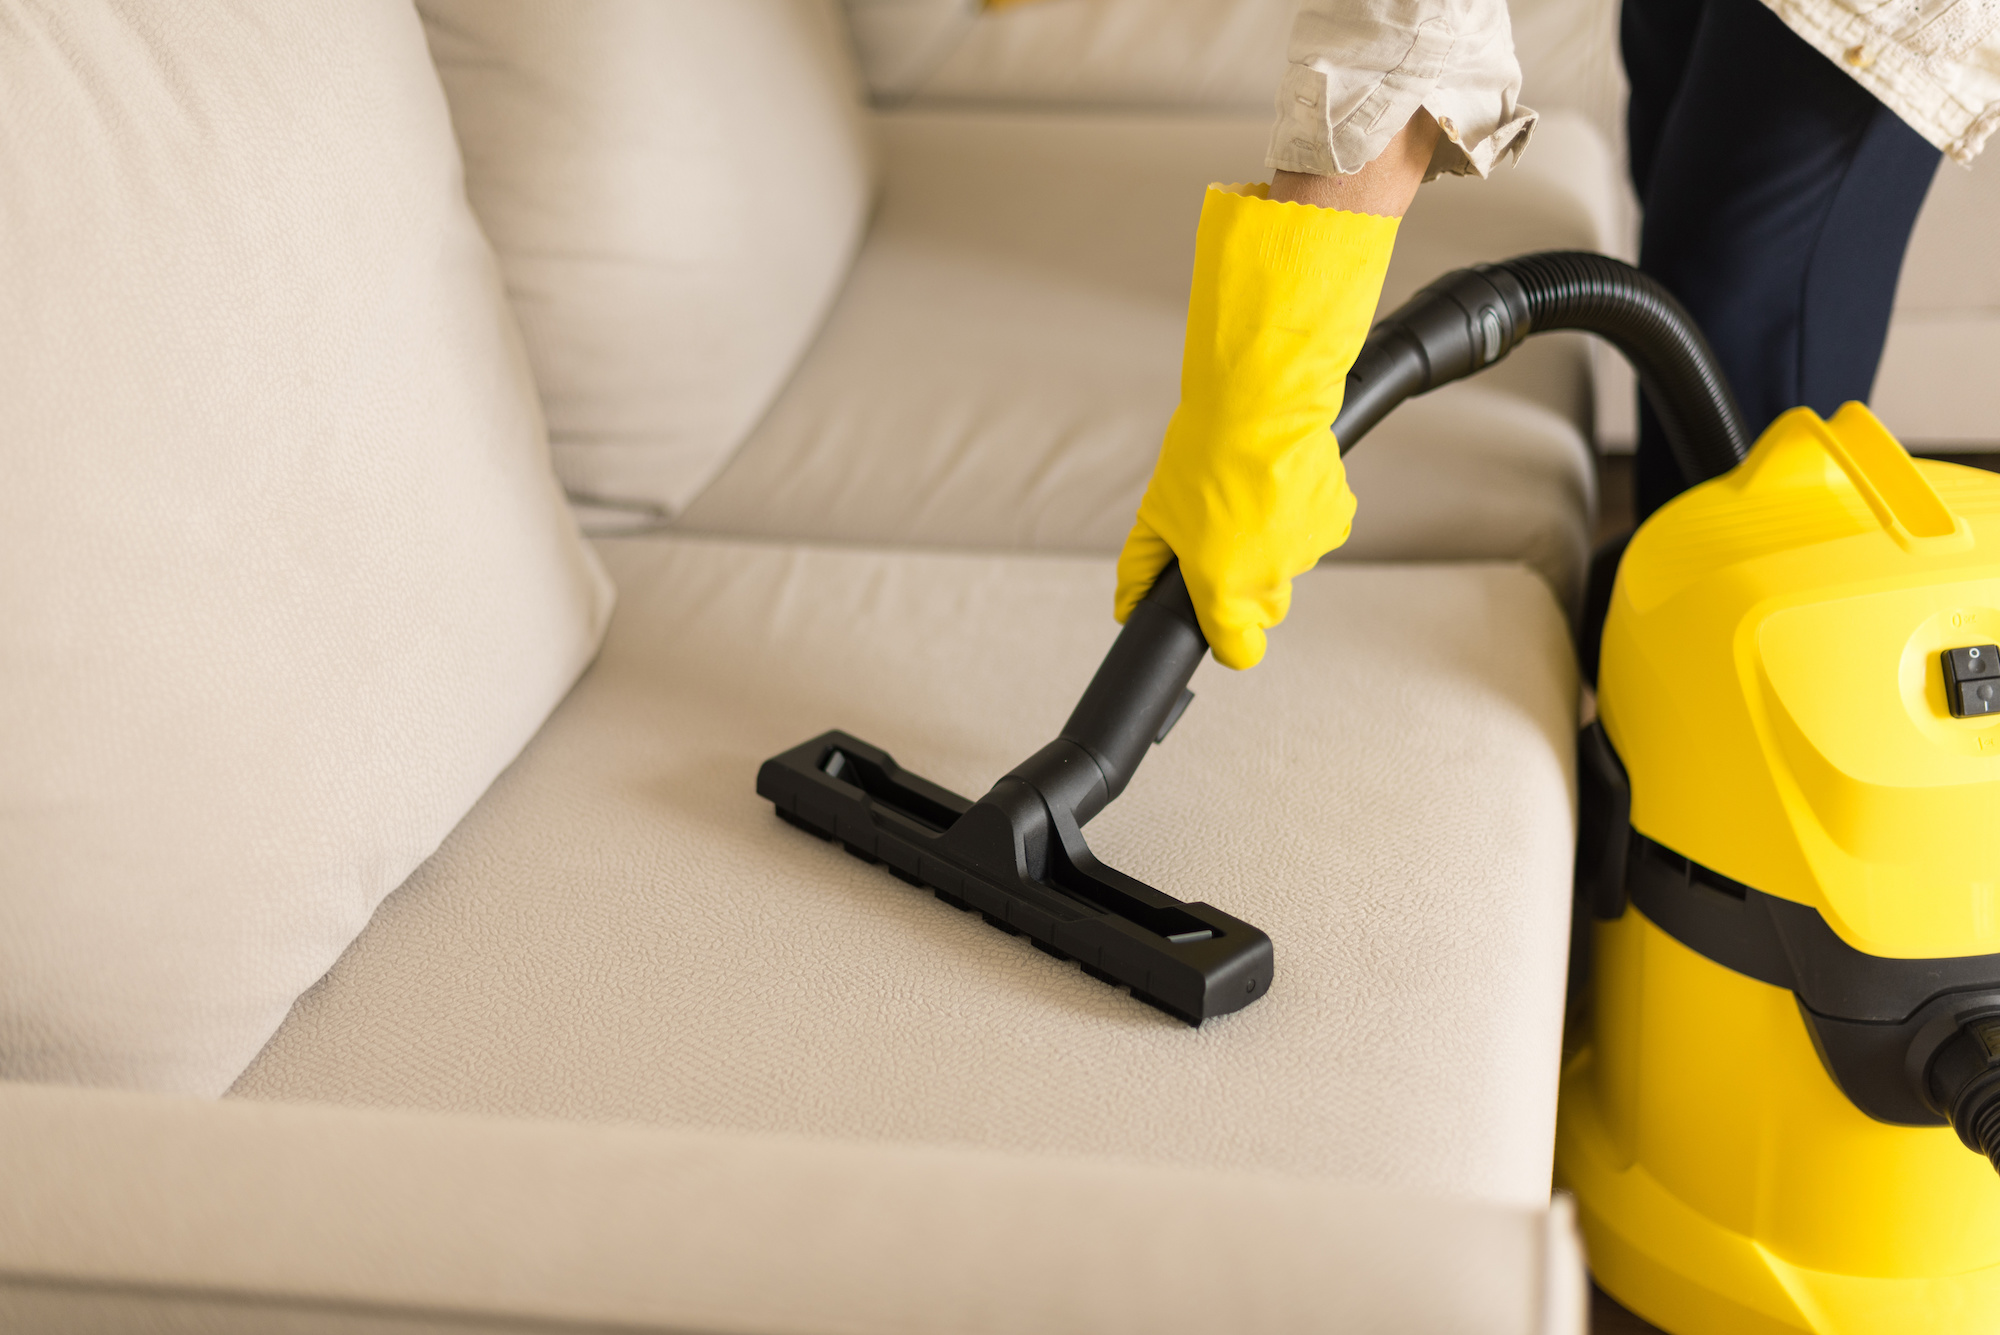 Hands in yellow cleaning gloves vacuum a grey couch.